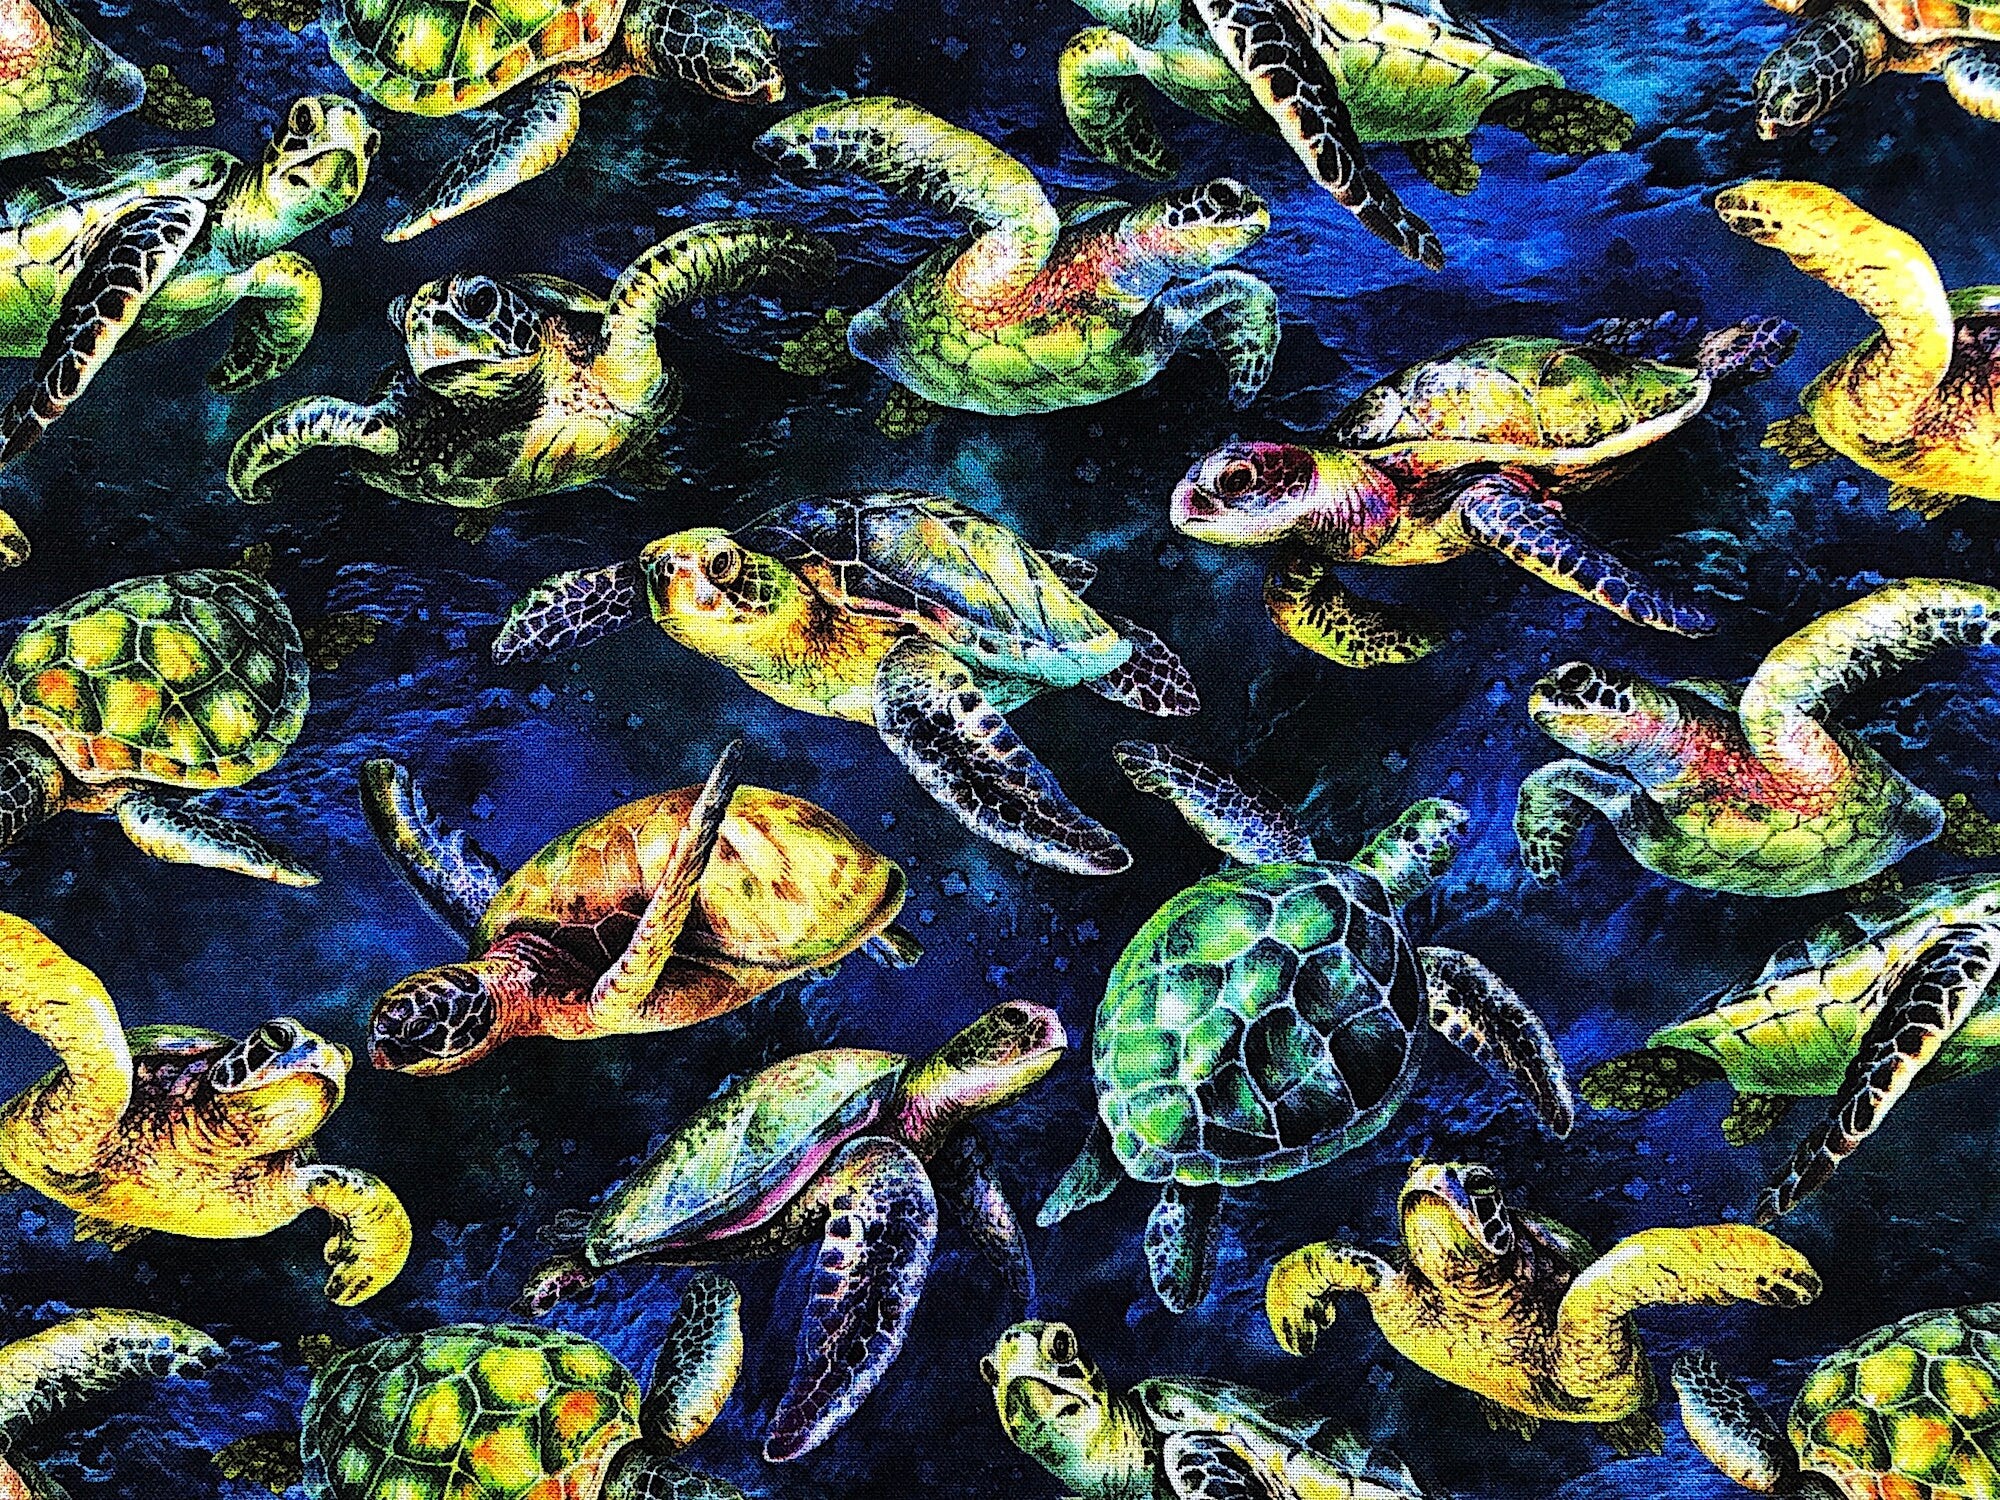 This fabric is part of The Reef collection and is covered with swimming sea turtles.